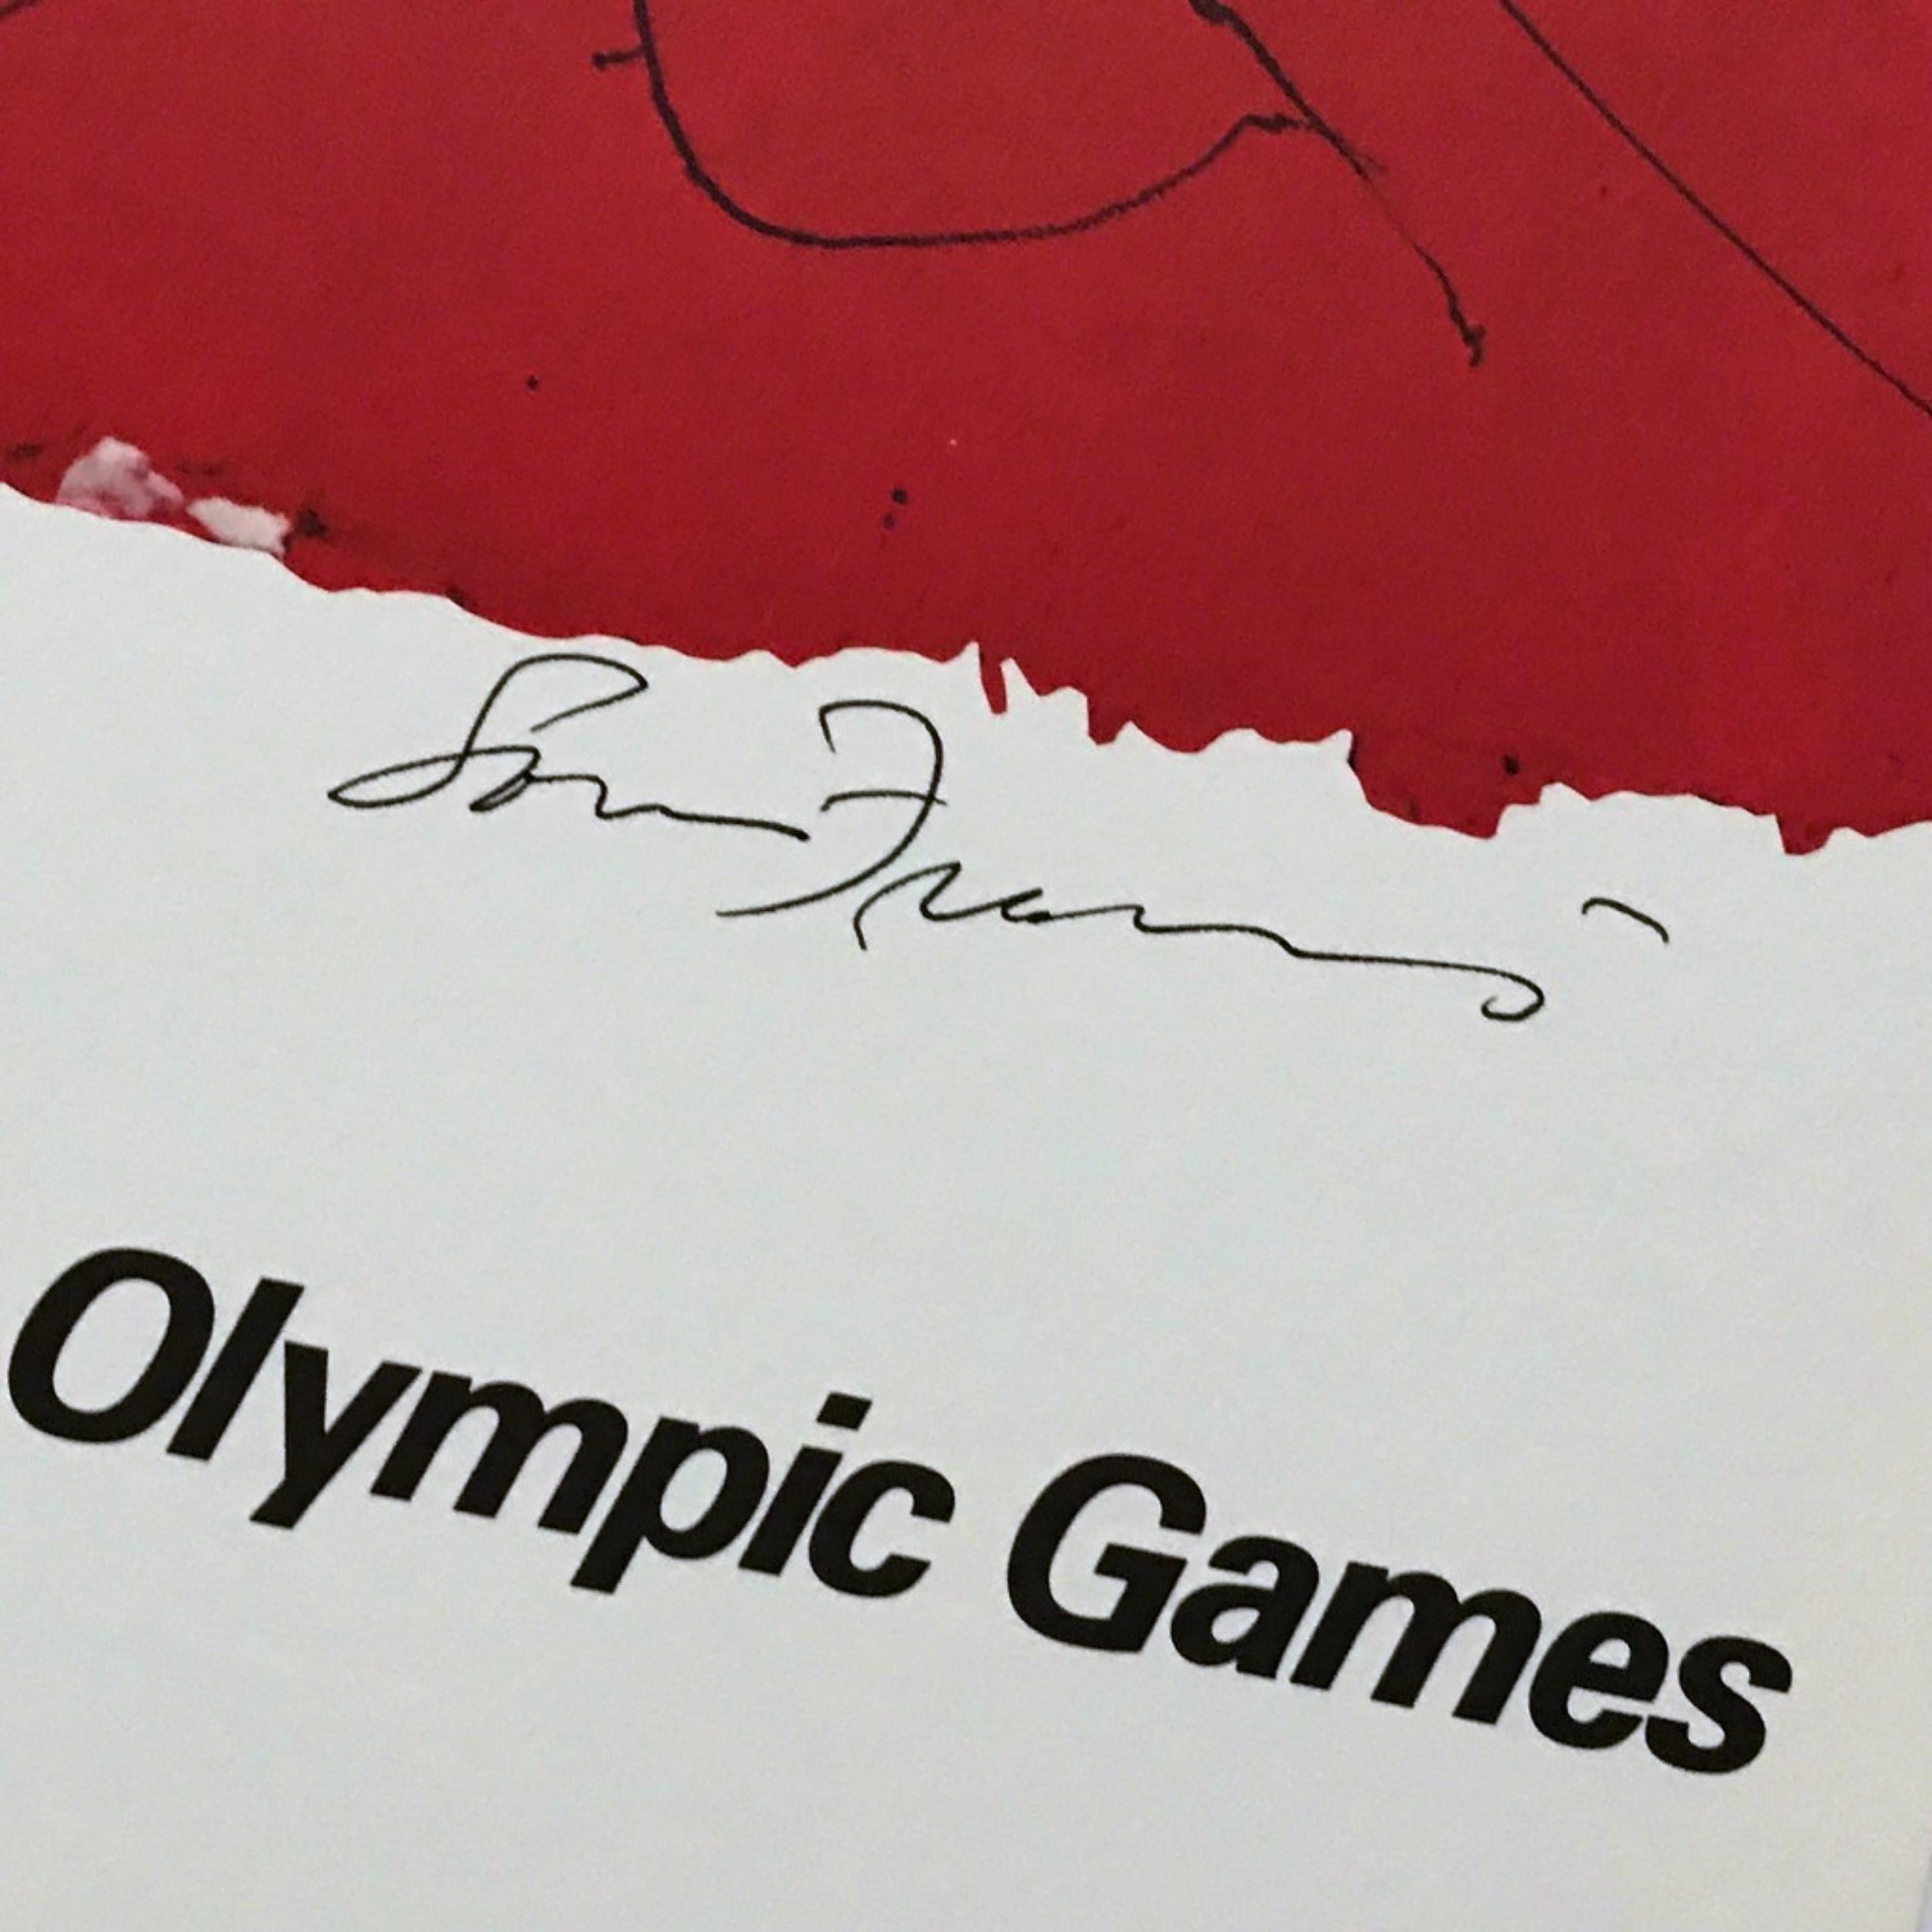 Lt Ed. Lithograph from the Deluxe (Hand Signed) 1984 Olympic Committee portfolio - Print by Sam Francis